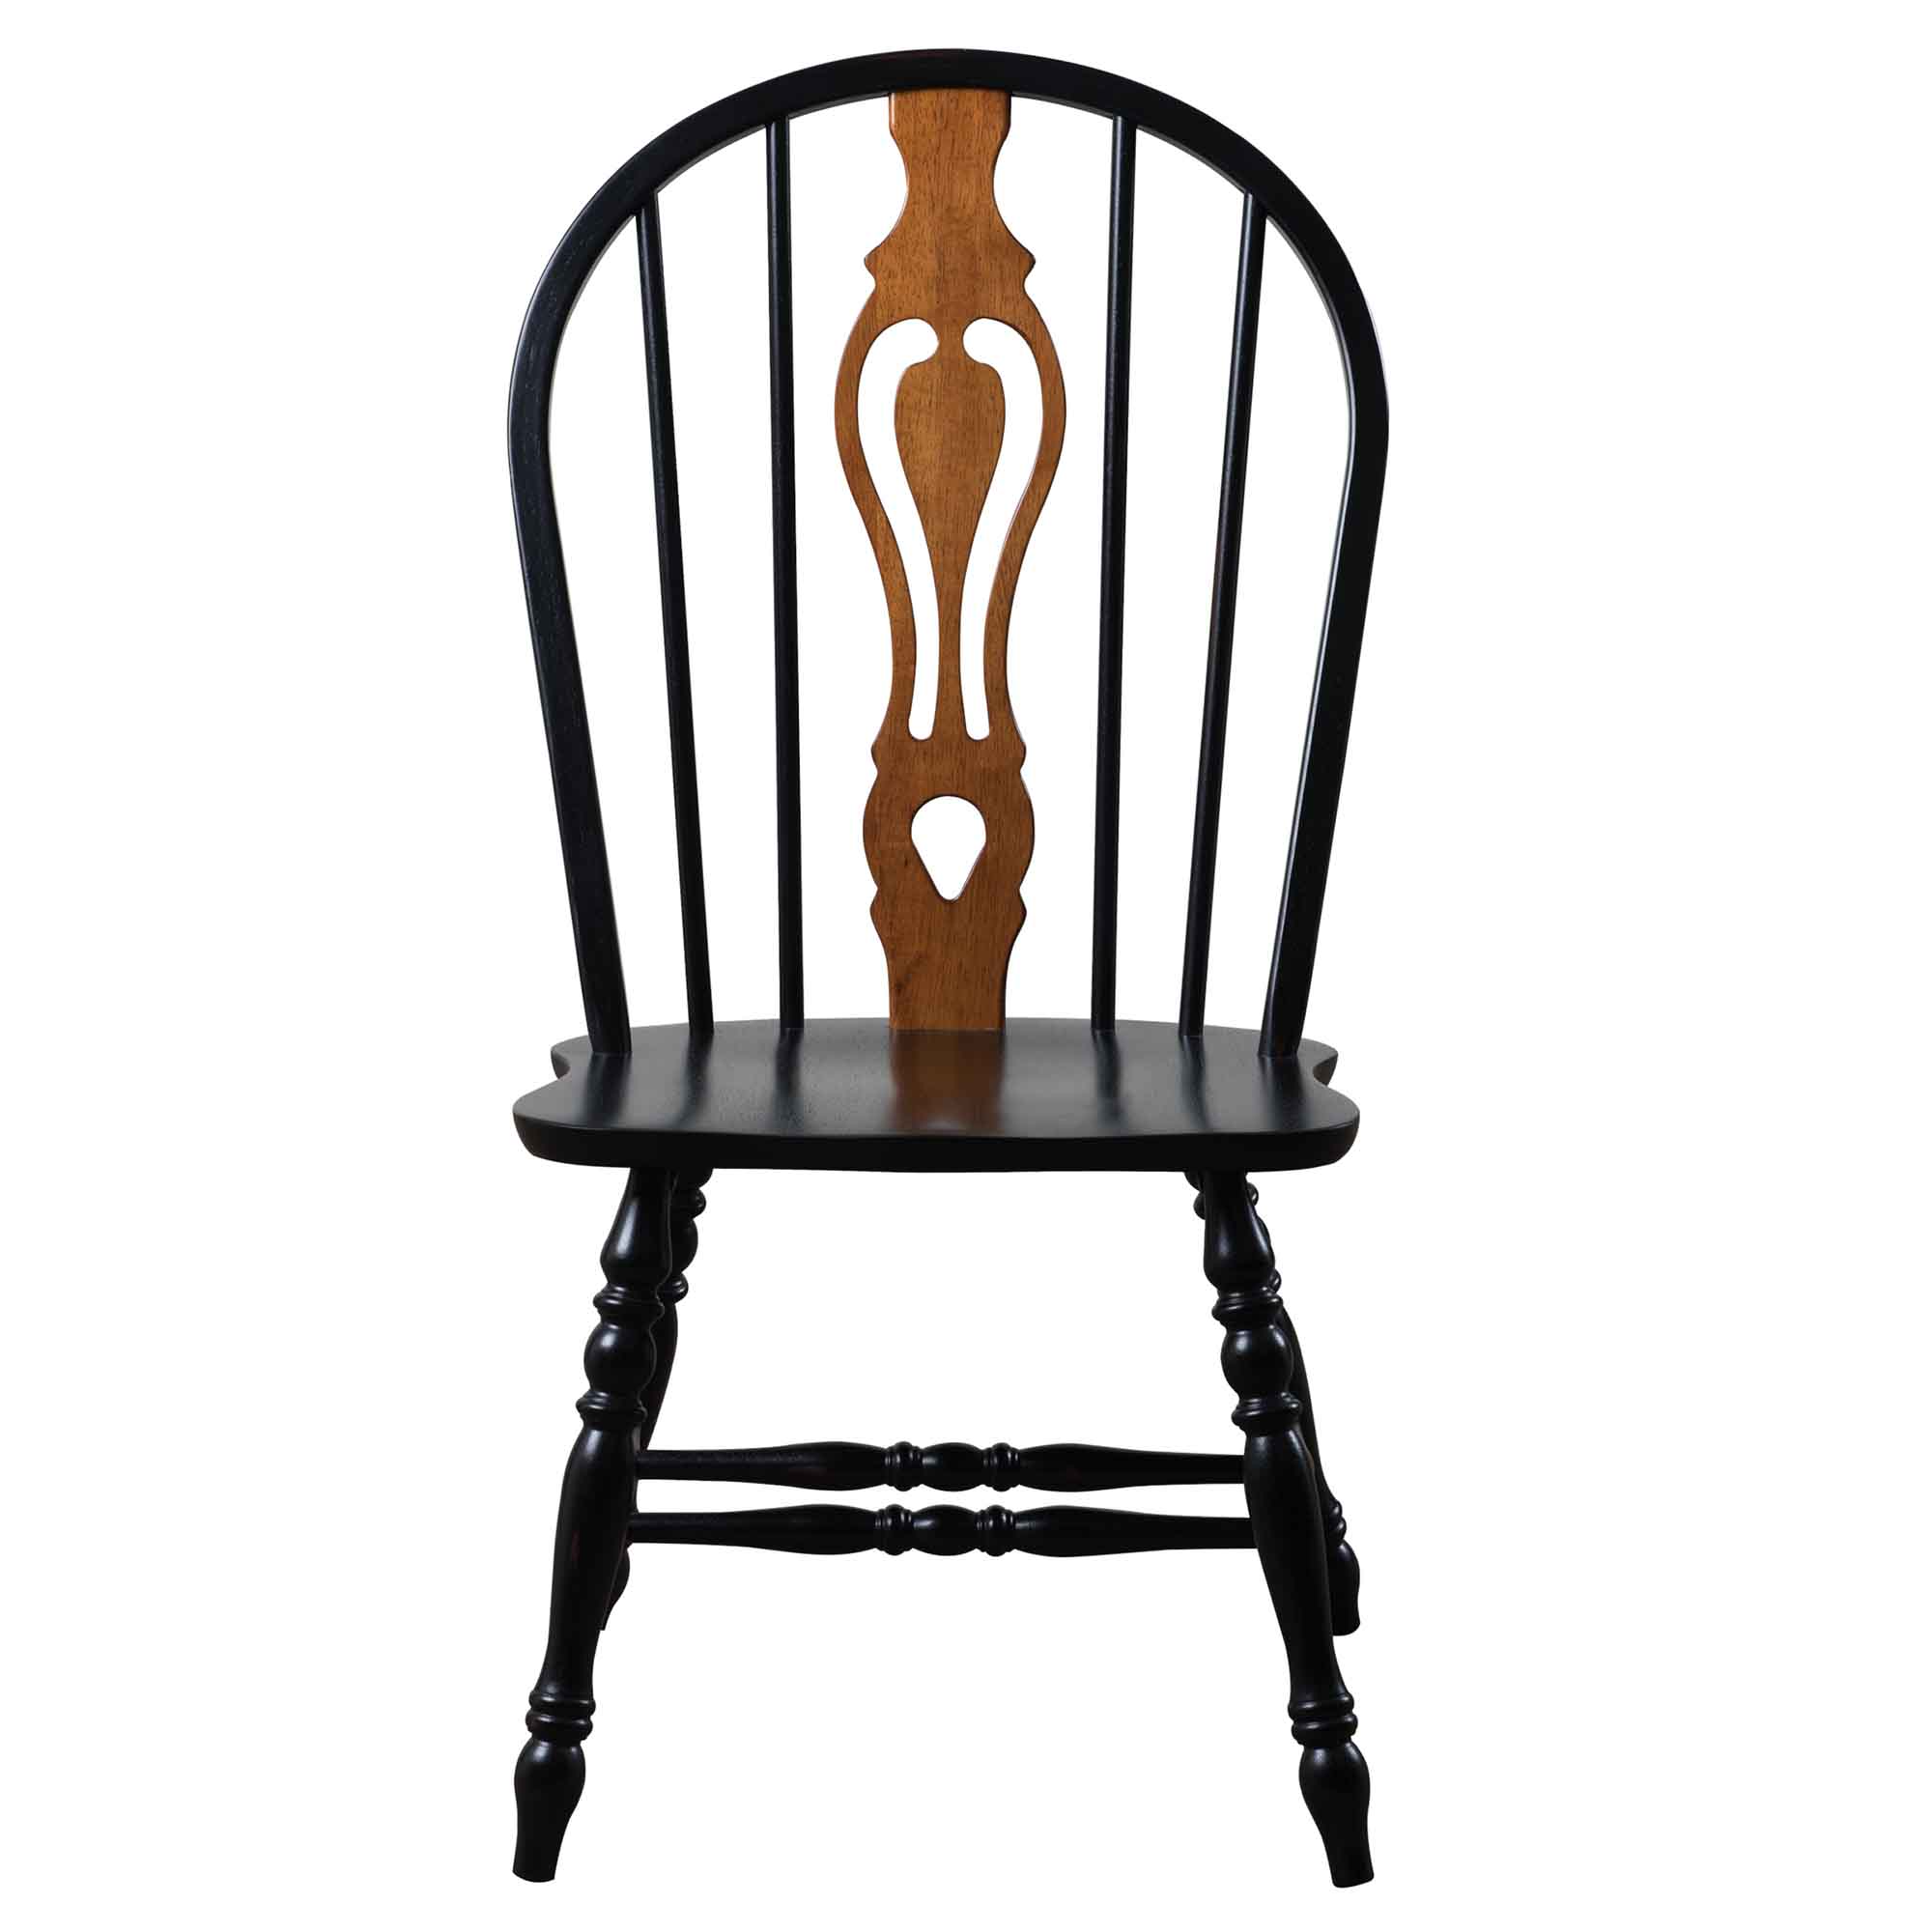 Keyhole Dining Chair Antique Black, Leather Keyhole Dining Chairs